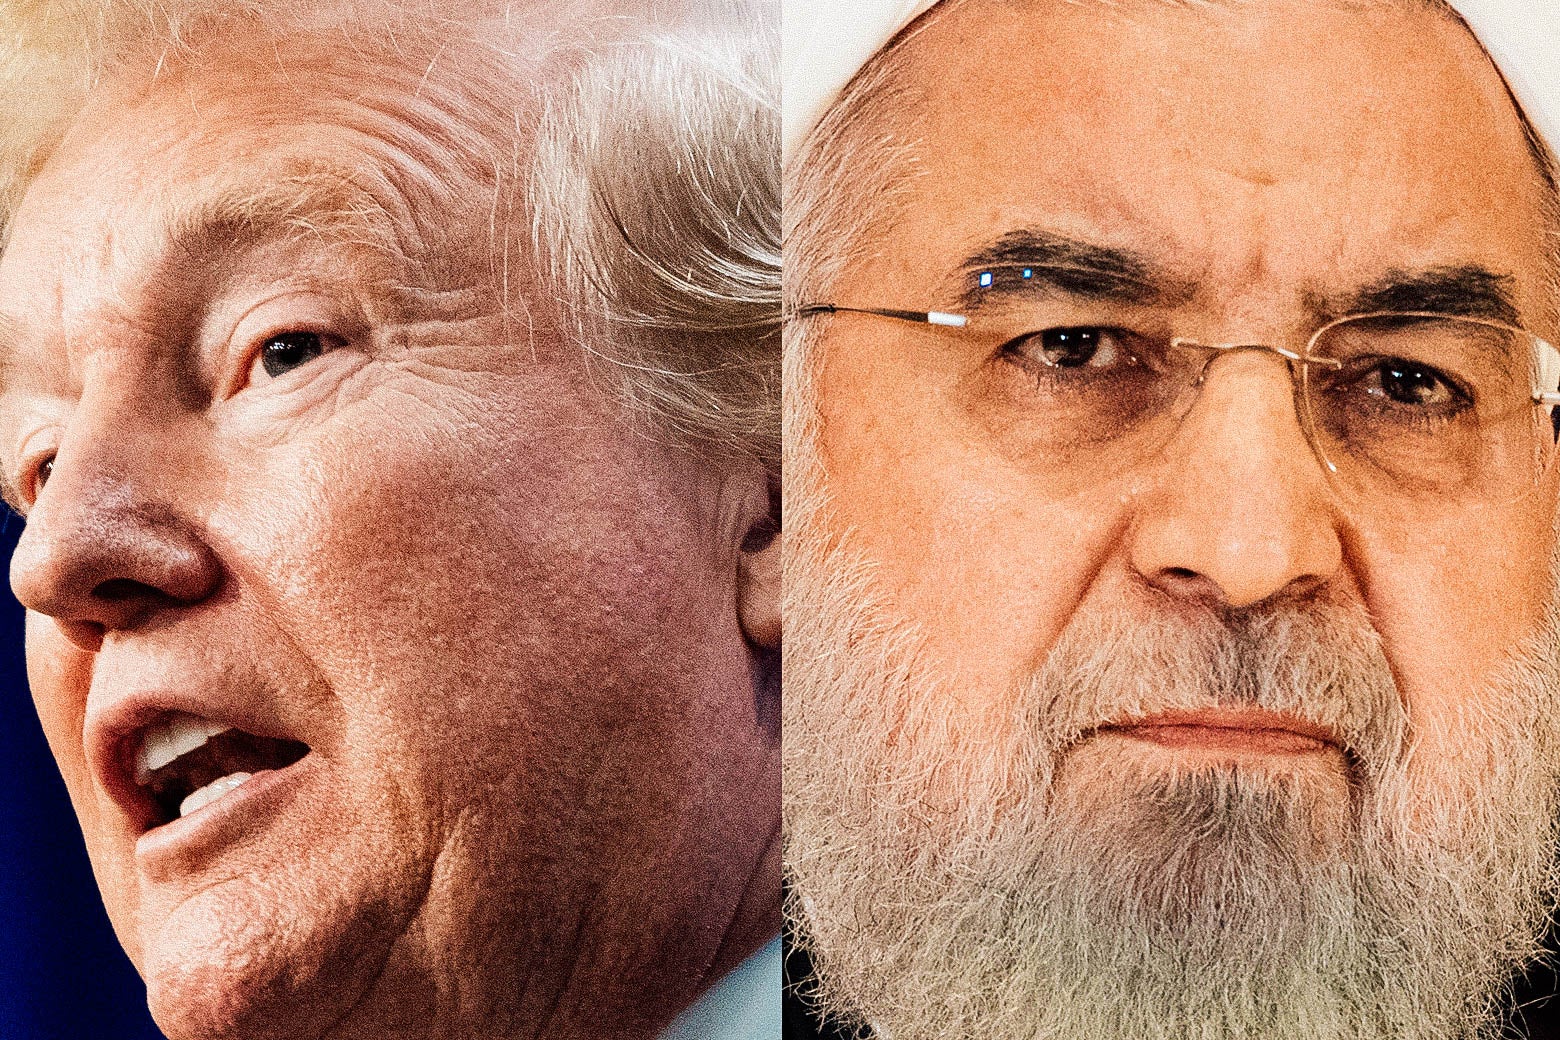 Diptych of Trump and Rouhani.